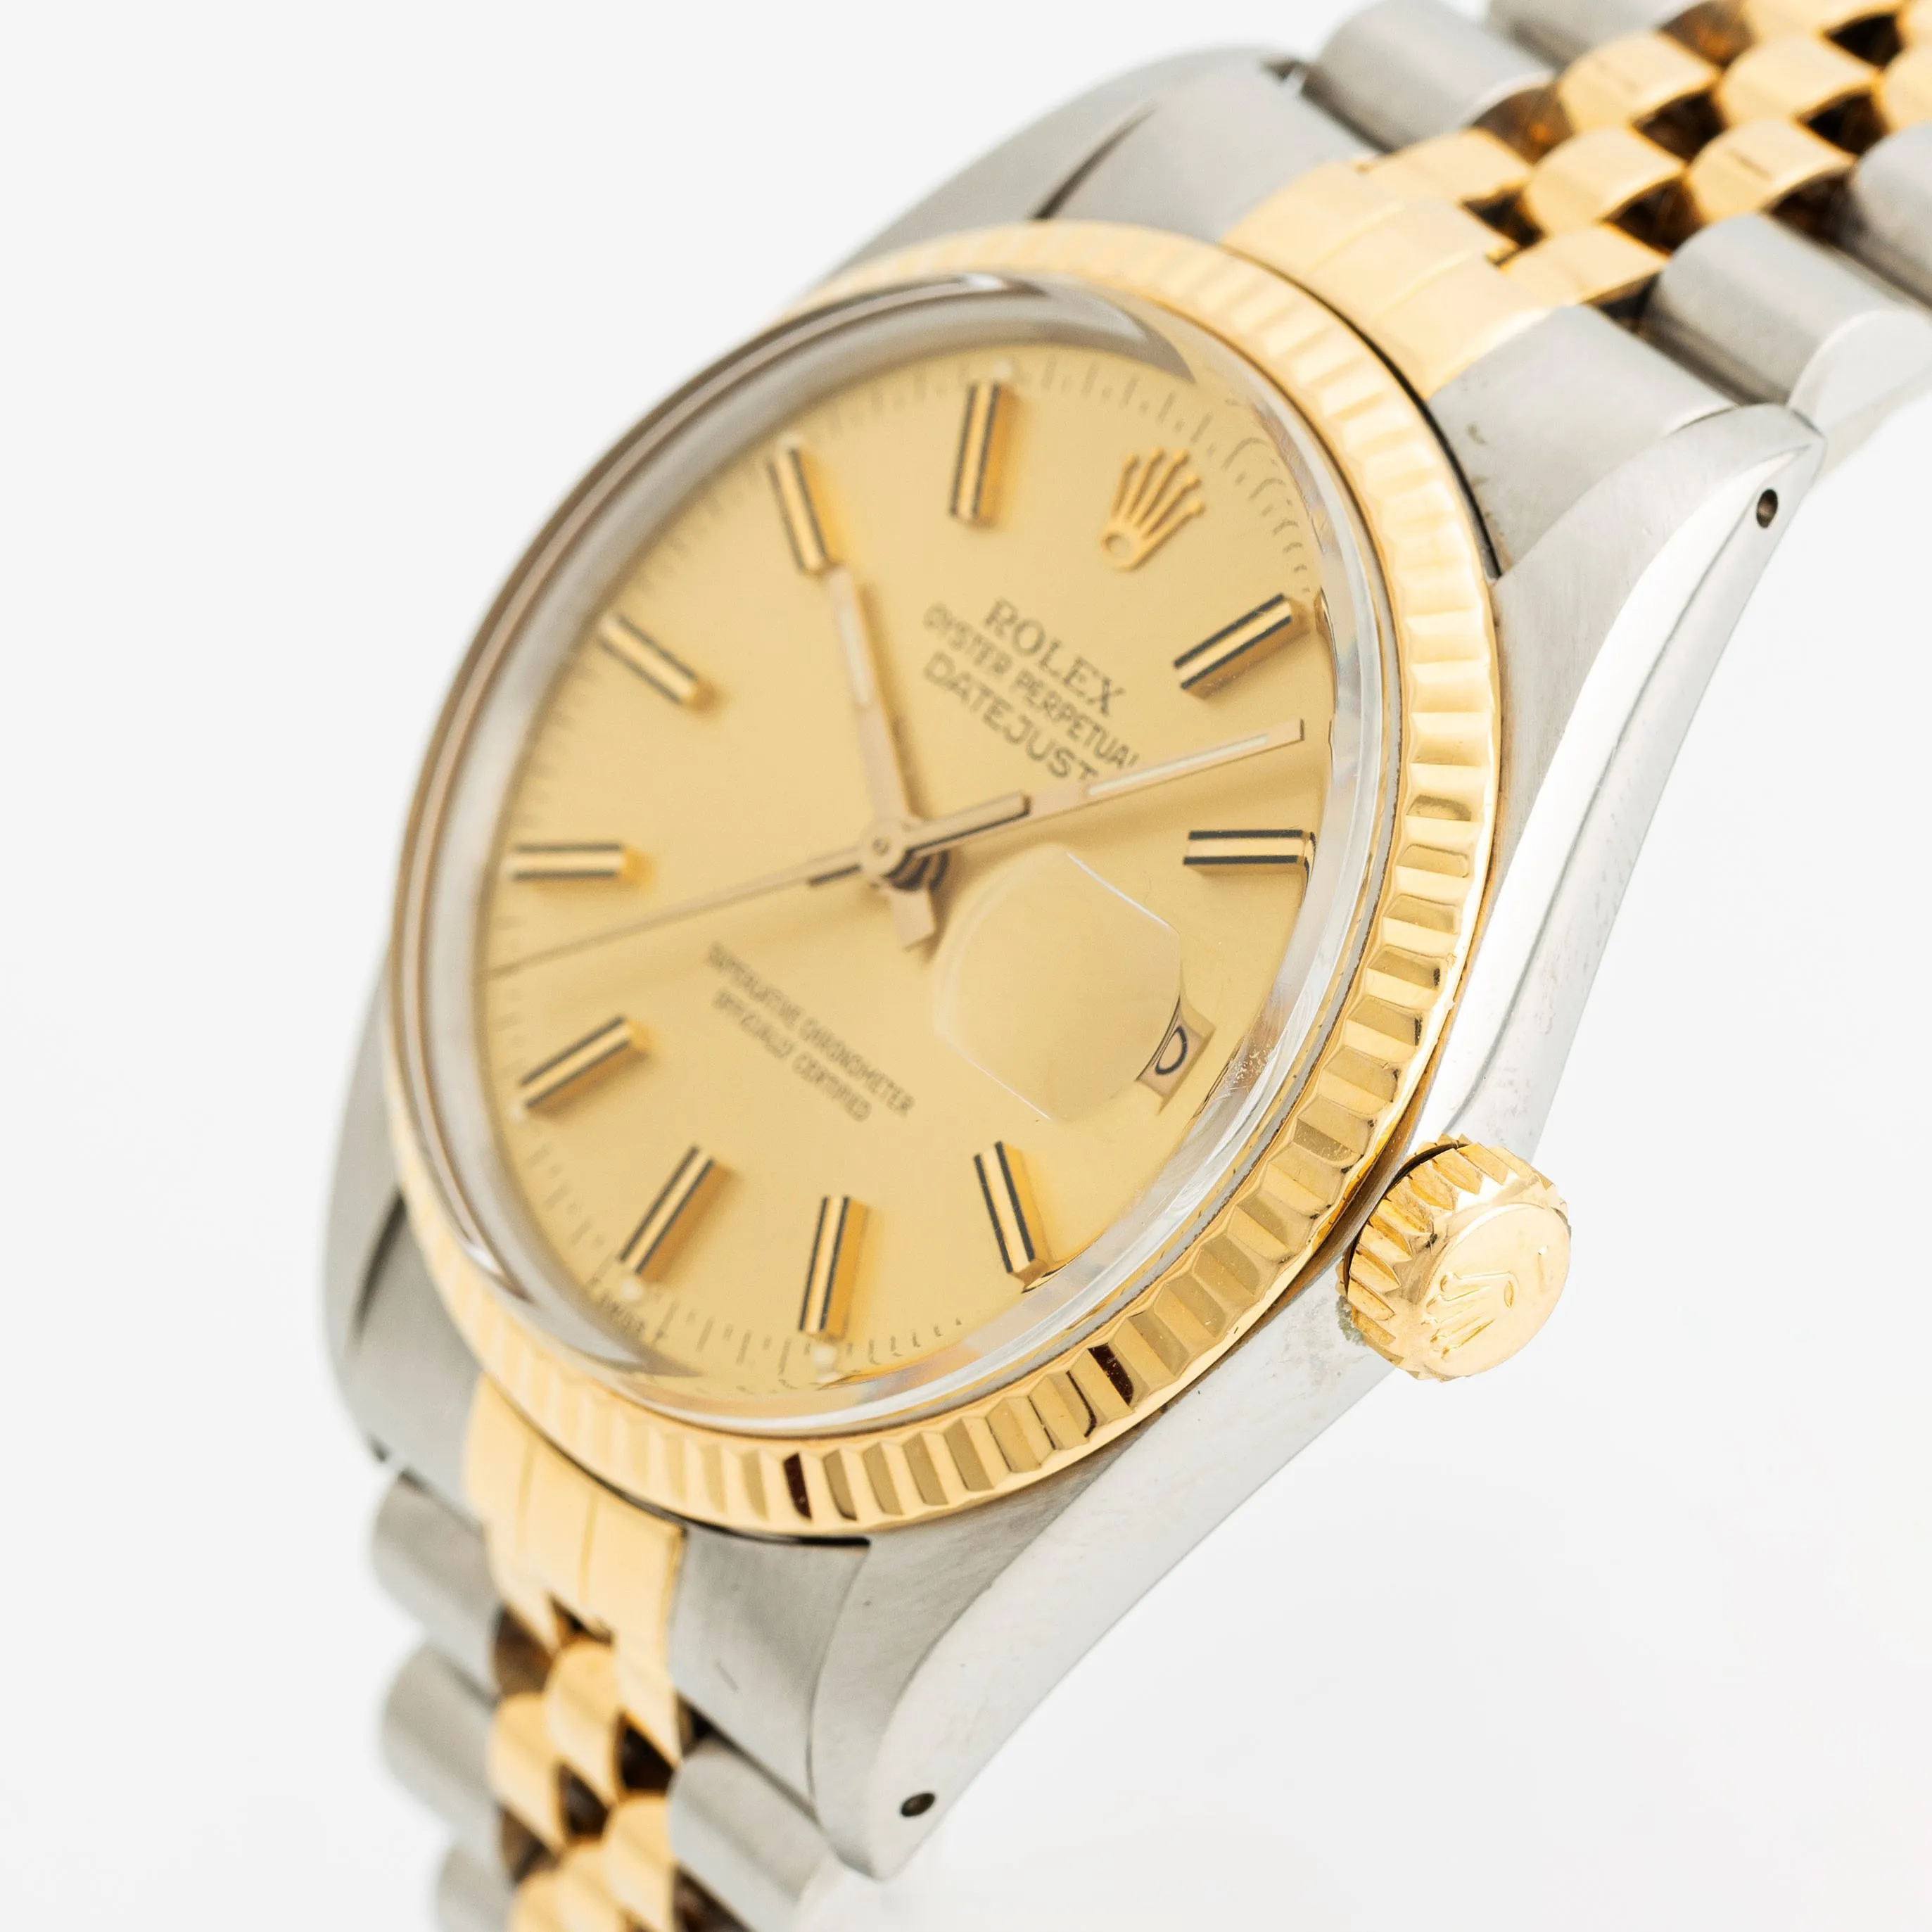 Rolex Datejust 16013 F 36mm Yellow gold and stainless steel 1